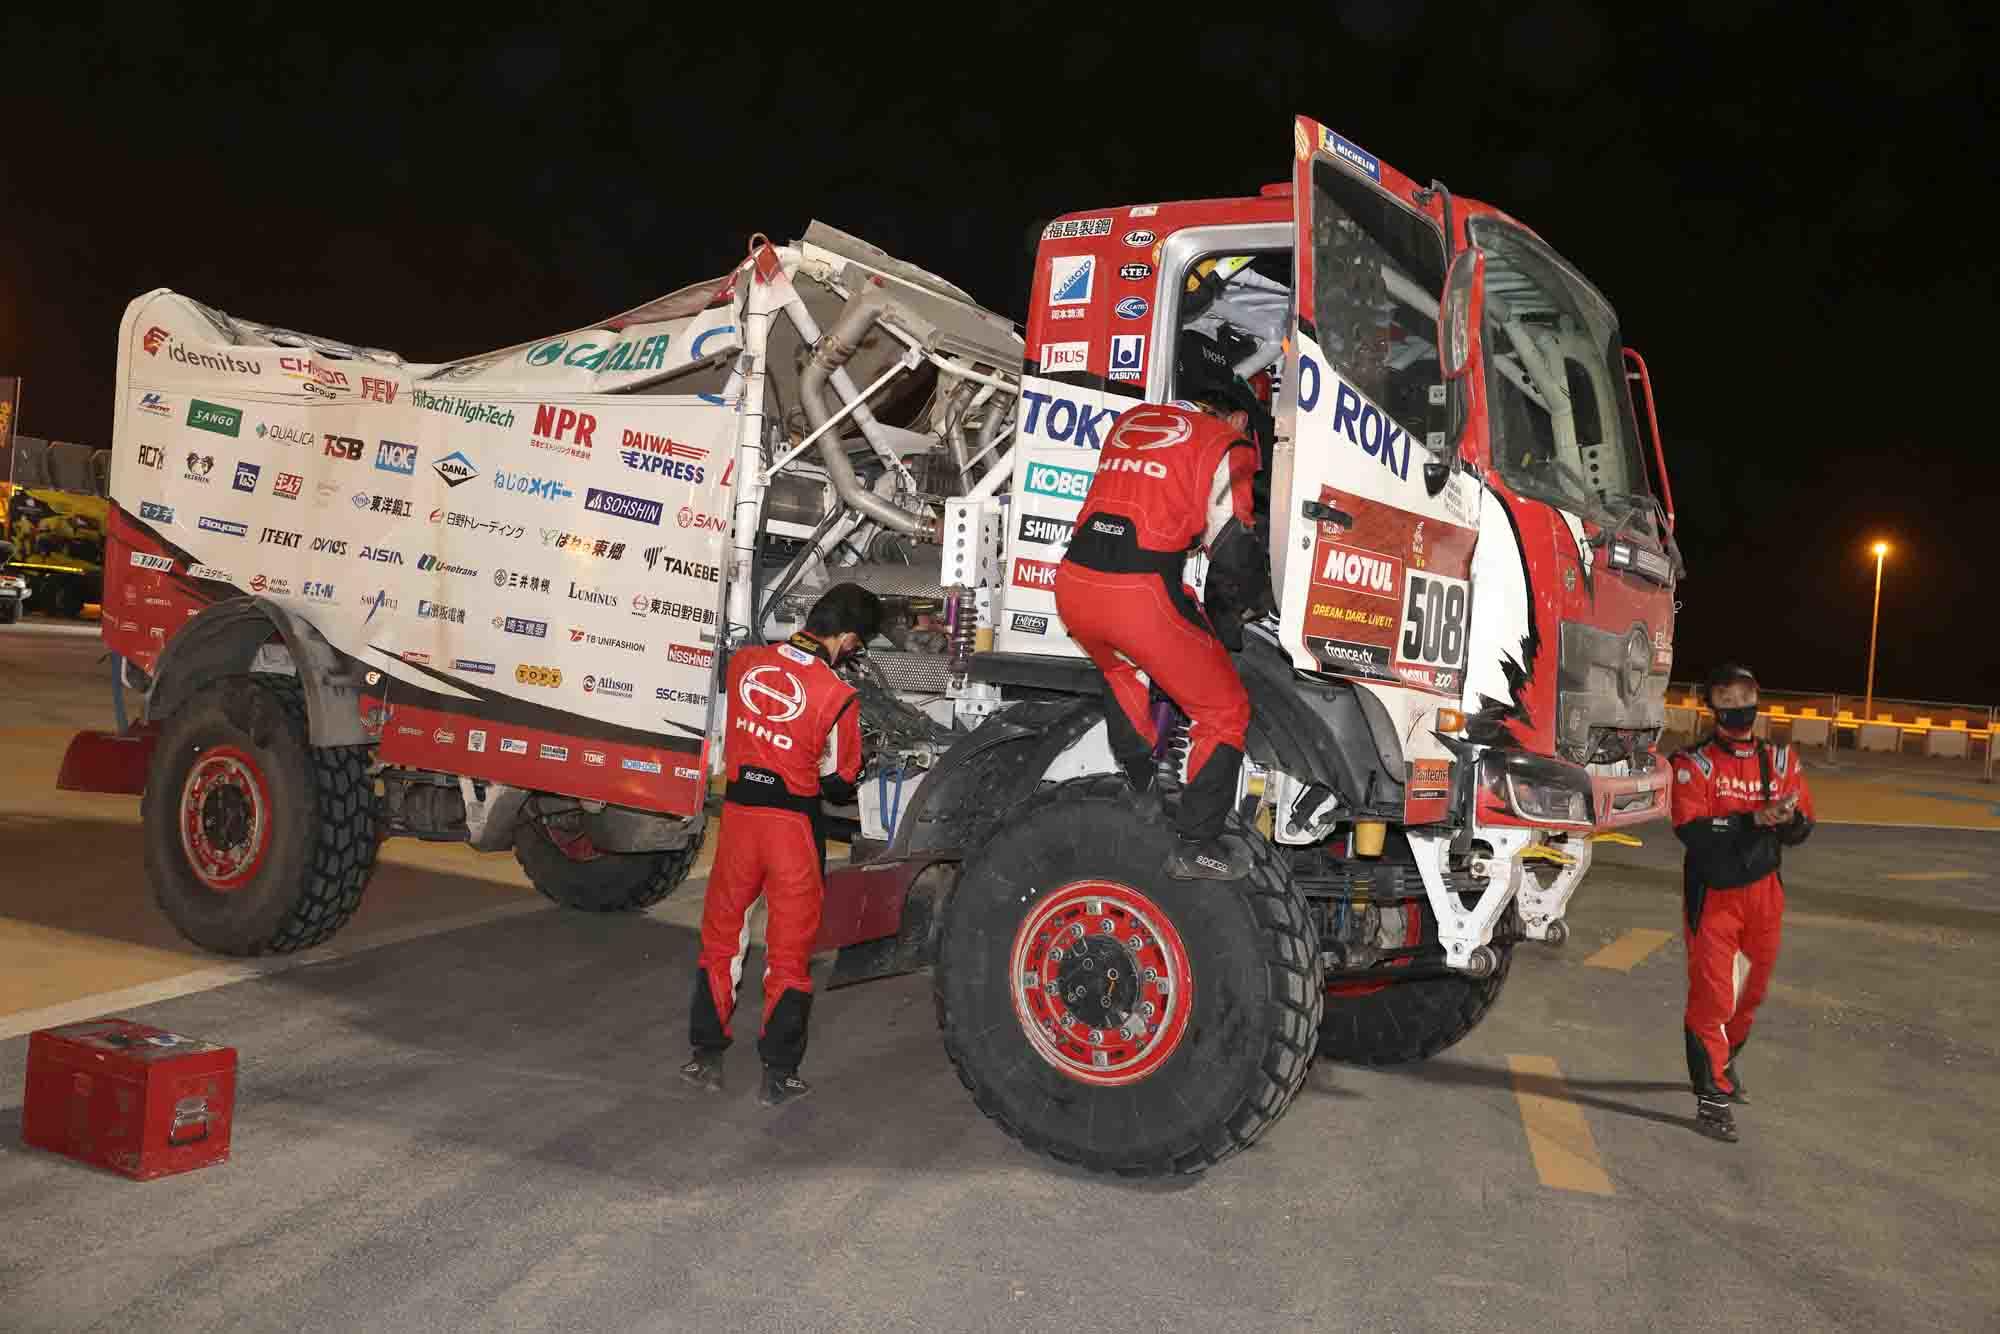 STAGE3:Unfortunate Tip-Over on a Tough Course in the Empty Quarter. All hands on deck repairing the truck to continue racing tomorrow morning.